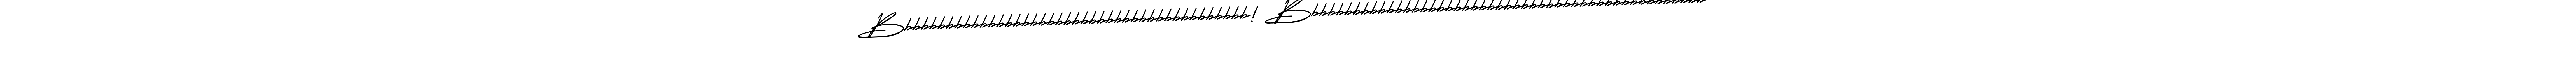 Bbbbbbbbbbbbbbbbbbbbbbbbbbbbbbbbbbbbbbbbbb! Bbbbbbbbbbbbbbbbbbbbbbbbbbbbbbbbbbbbbbbbbbbbbbbb stylish signature style. Best Handwritten Sign (AmerikaSignatureDemo-Regular) for my name. Handwritten Signature Collection Ideas for my name Bbbbbbbbbbbbbbbbbbbbbbbbbbbbbbbbbbbbbbbbbb! Bbbbbbbbbbbbbbbbbbbbbbbbbbbbbbbbbbbbbbbbbbbbbbbb. Bbbbbbbbbbbbbbbbbbbbbbbbbbbbbbbbbbbbbbbbbb! Bbbbbbbbbbbbbbbbbbbbbbbbbbbbbbbbbbbbbbbbbbbbbbbb signature style 3 images and pictures png